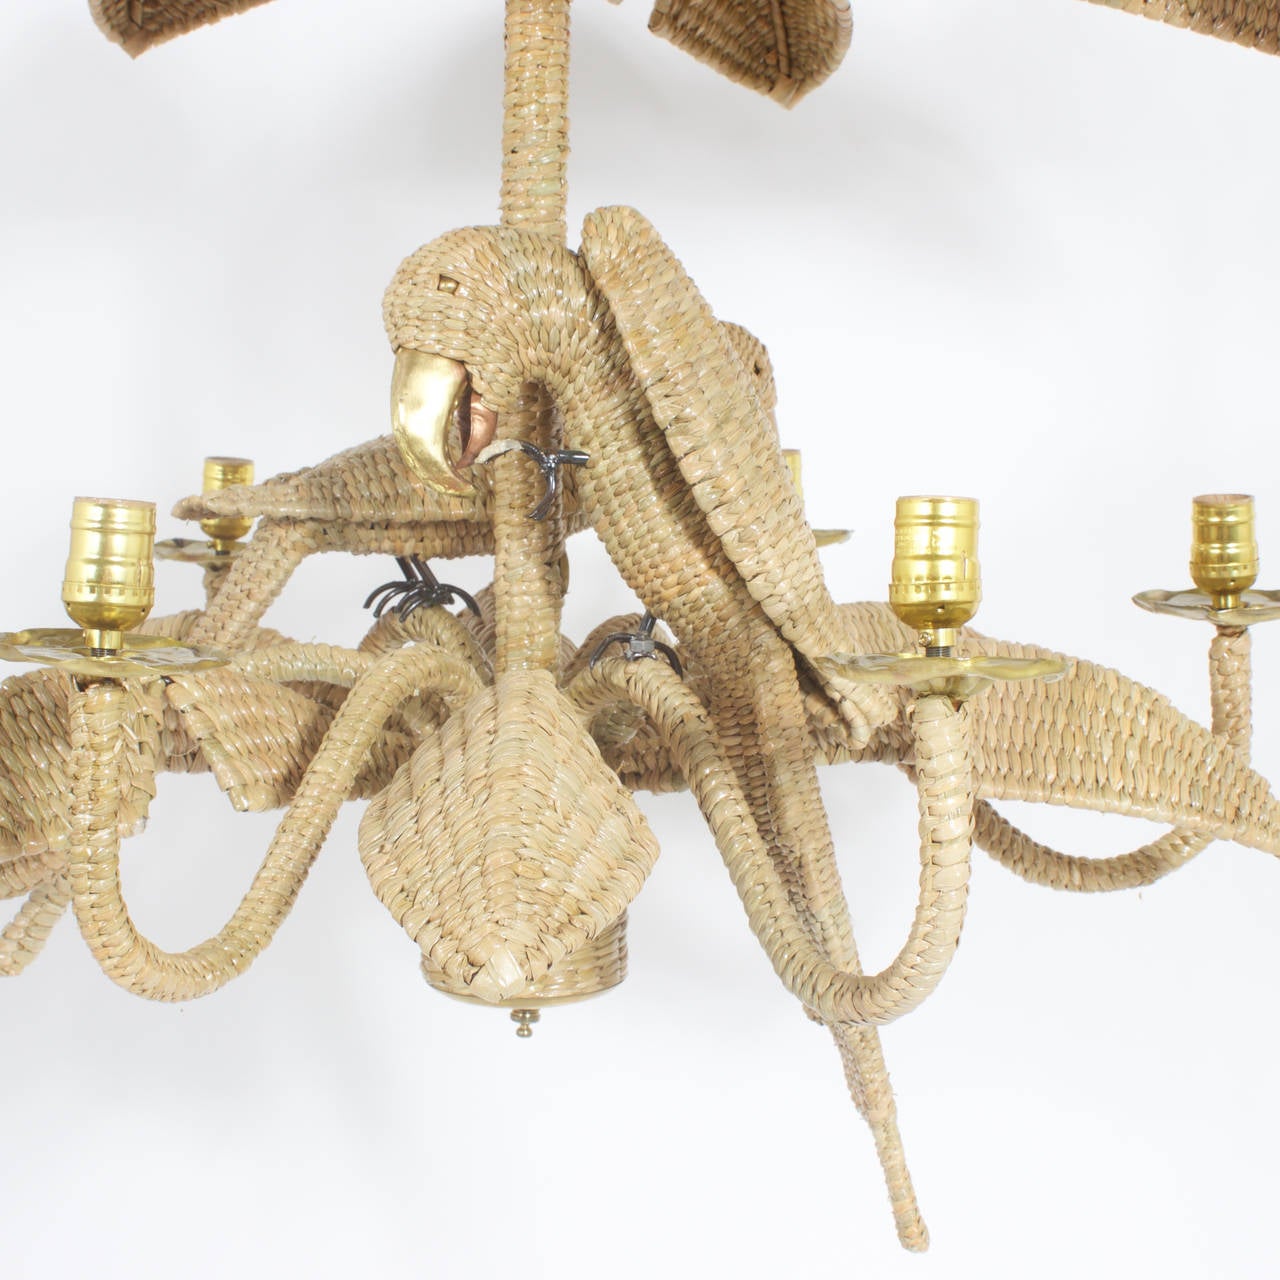 Mario Torres midcentury 6-light chandelier constructed of an iron frame wrapped with wicker or reed in an intricate tight weave. Featuring 2 busy and playful parrots with brass and copper beaks surrounded by 2 layers of palm fronds creating a fun